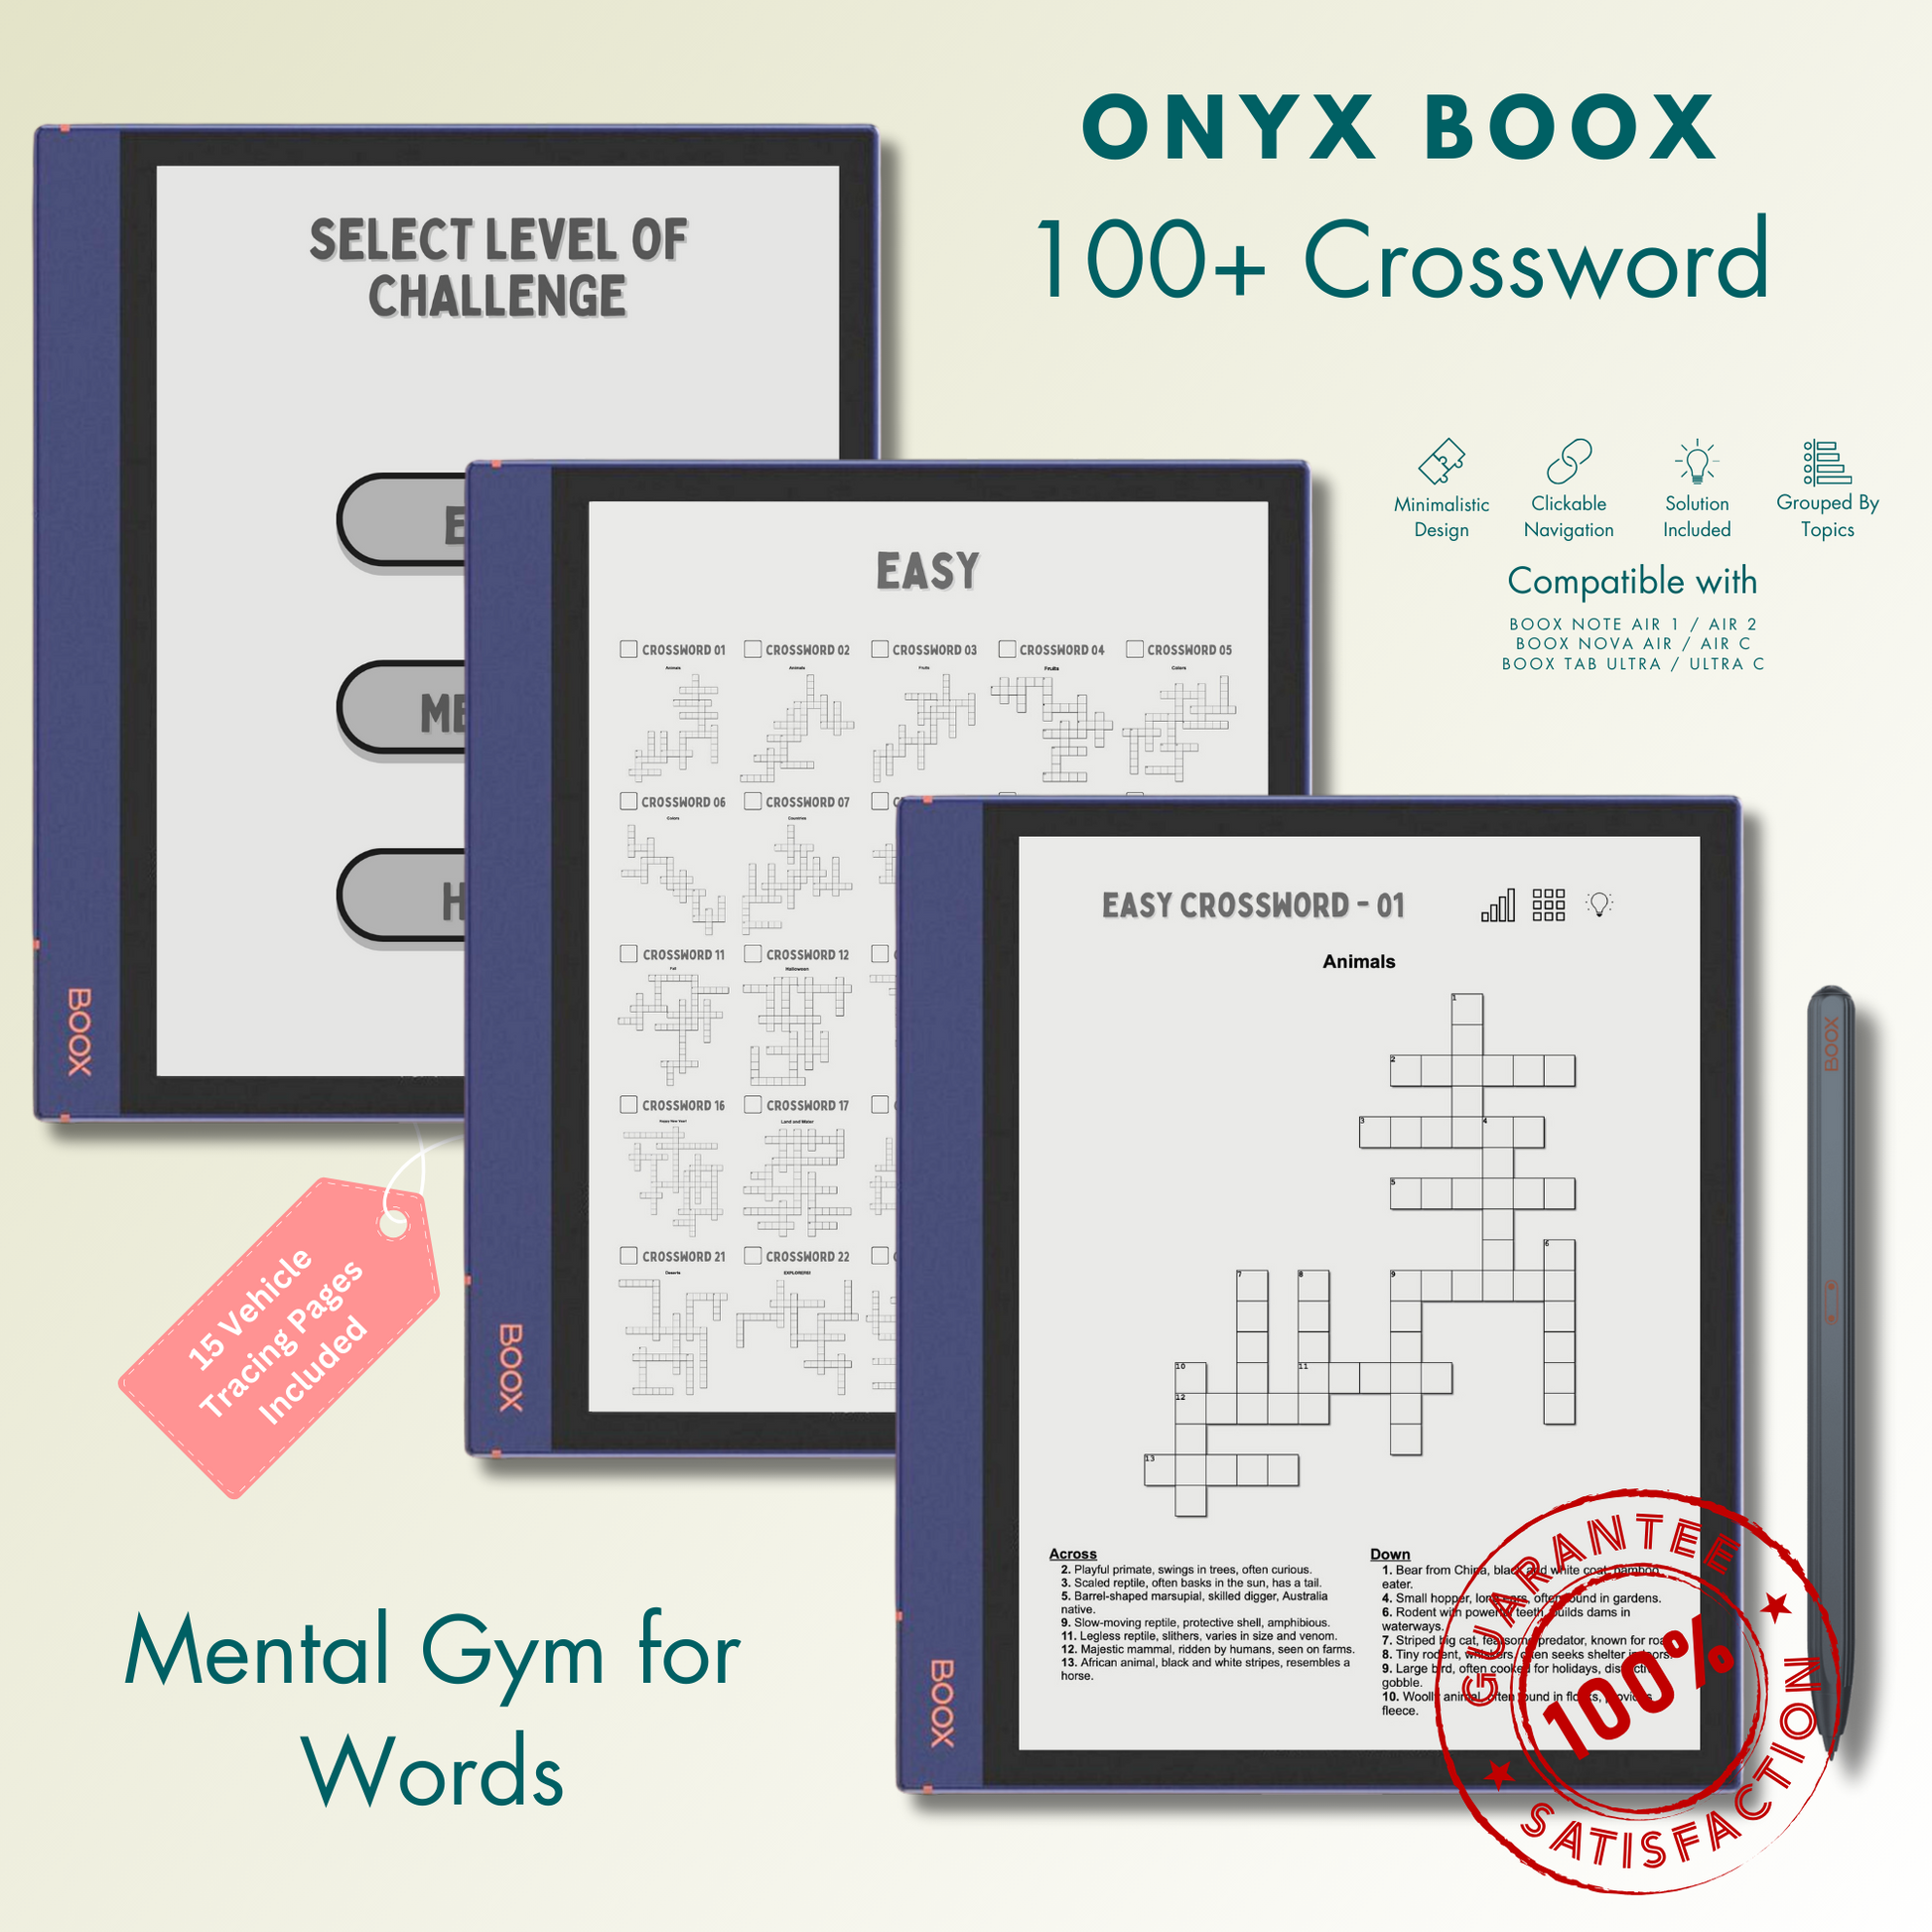 This is a Digital Download of 100+ Crossword Puzzles in 3 different levels tailored for Onyx Boox. Compatible with Boox Note Air 1, Boox Note Air 2, Boox Note Air Plus, Boox Nova Air, Boox Nova Air C, Boox Tab Ultra and Boox Tab Ultra C.